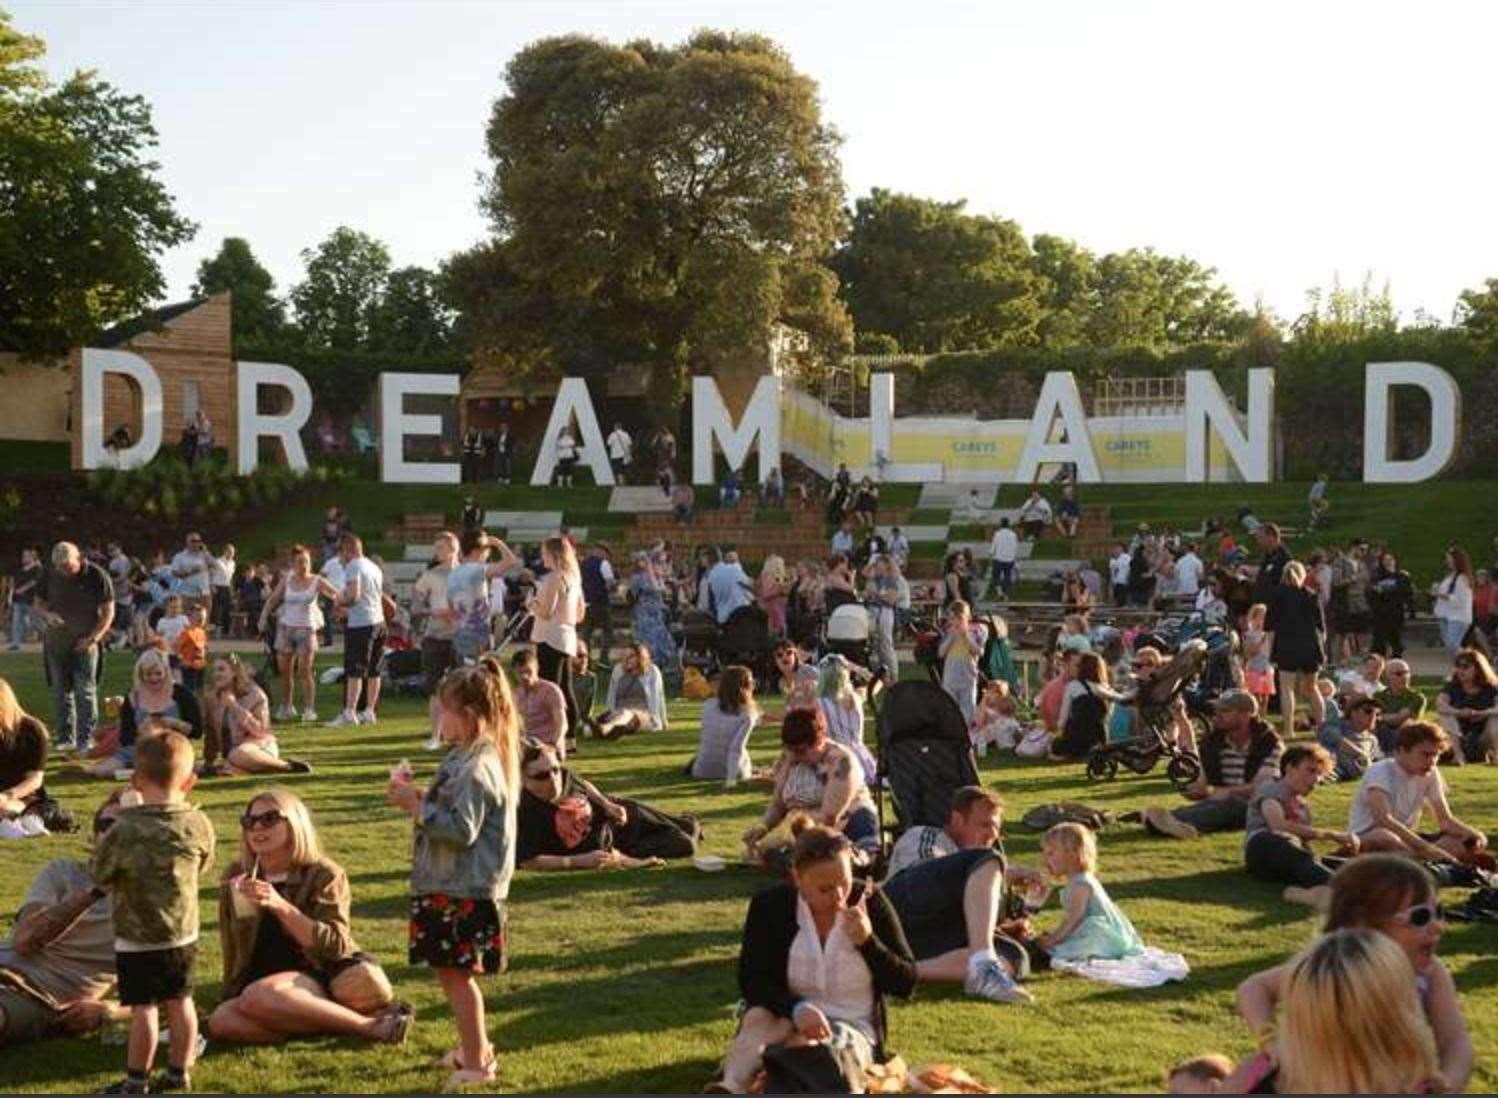 Dreamland in Margate will be sold